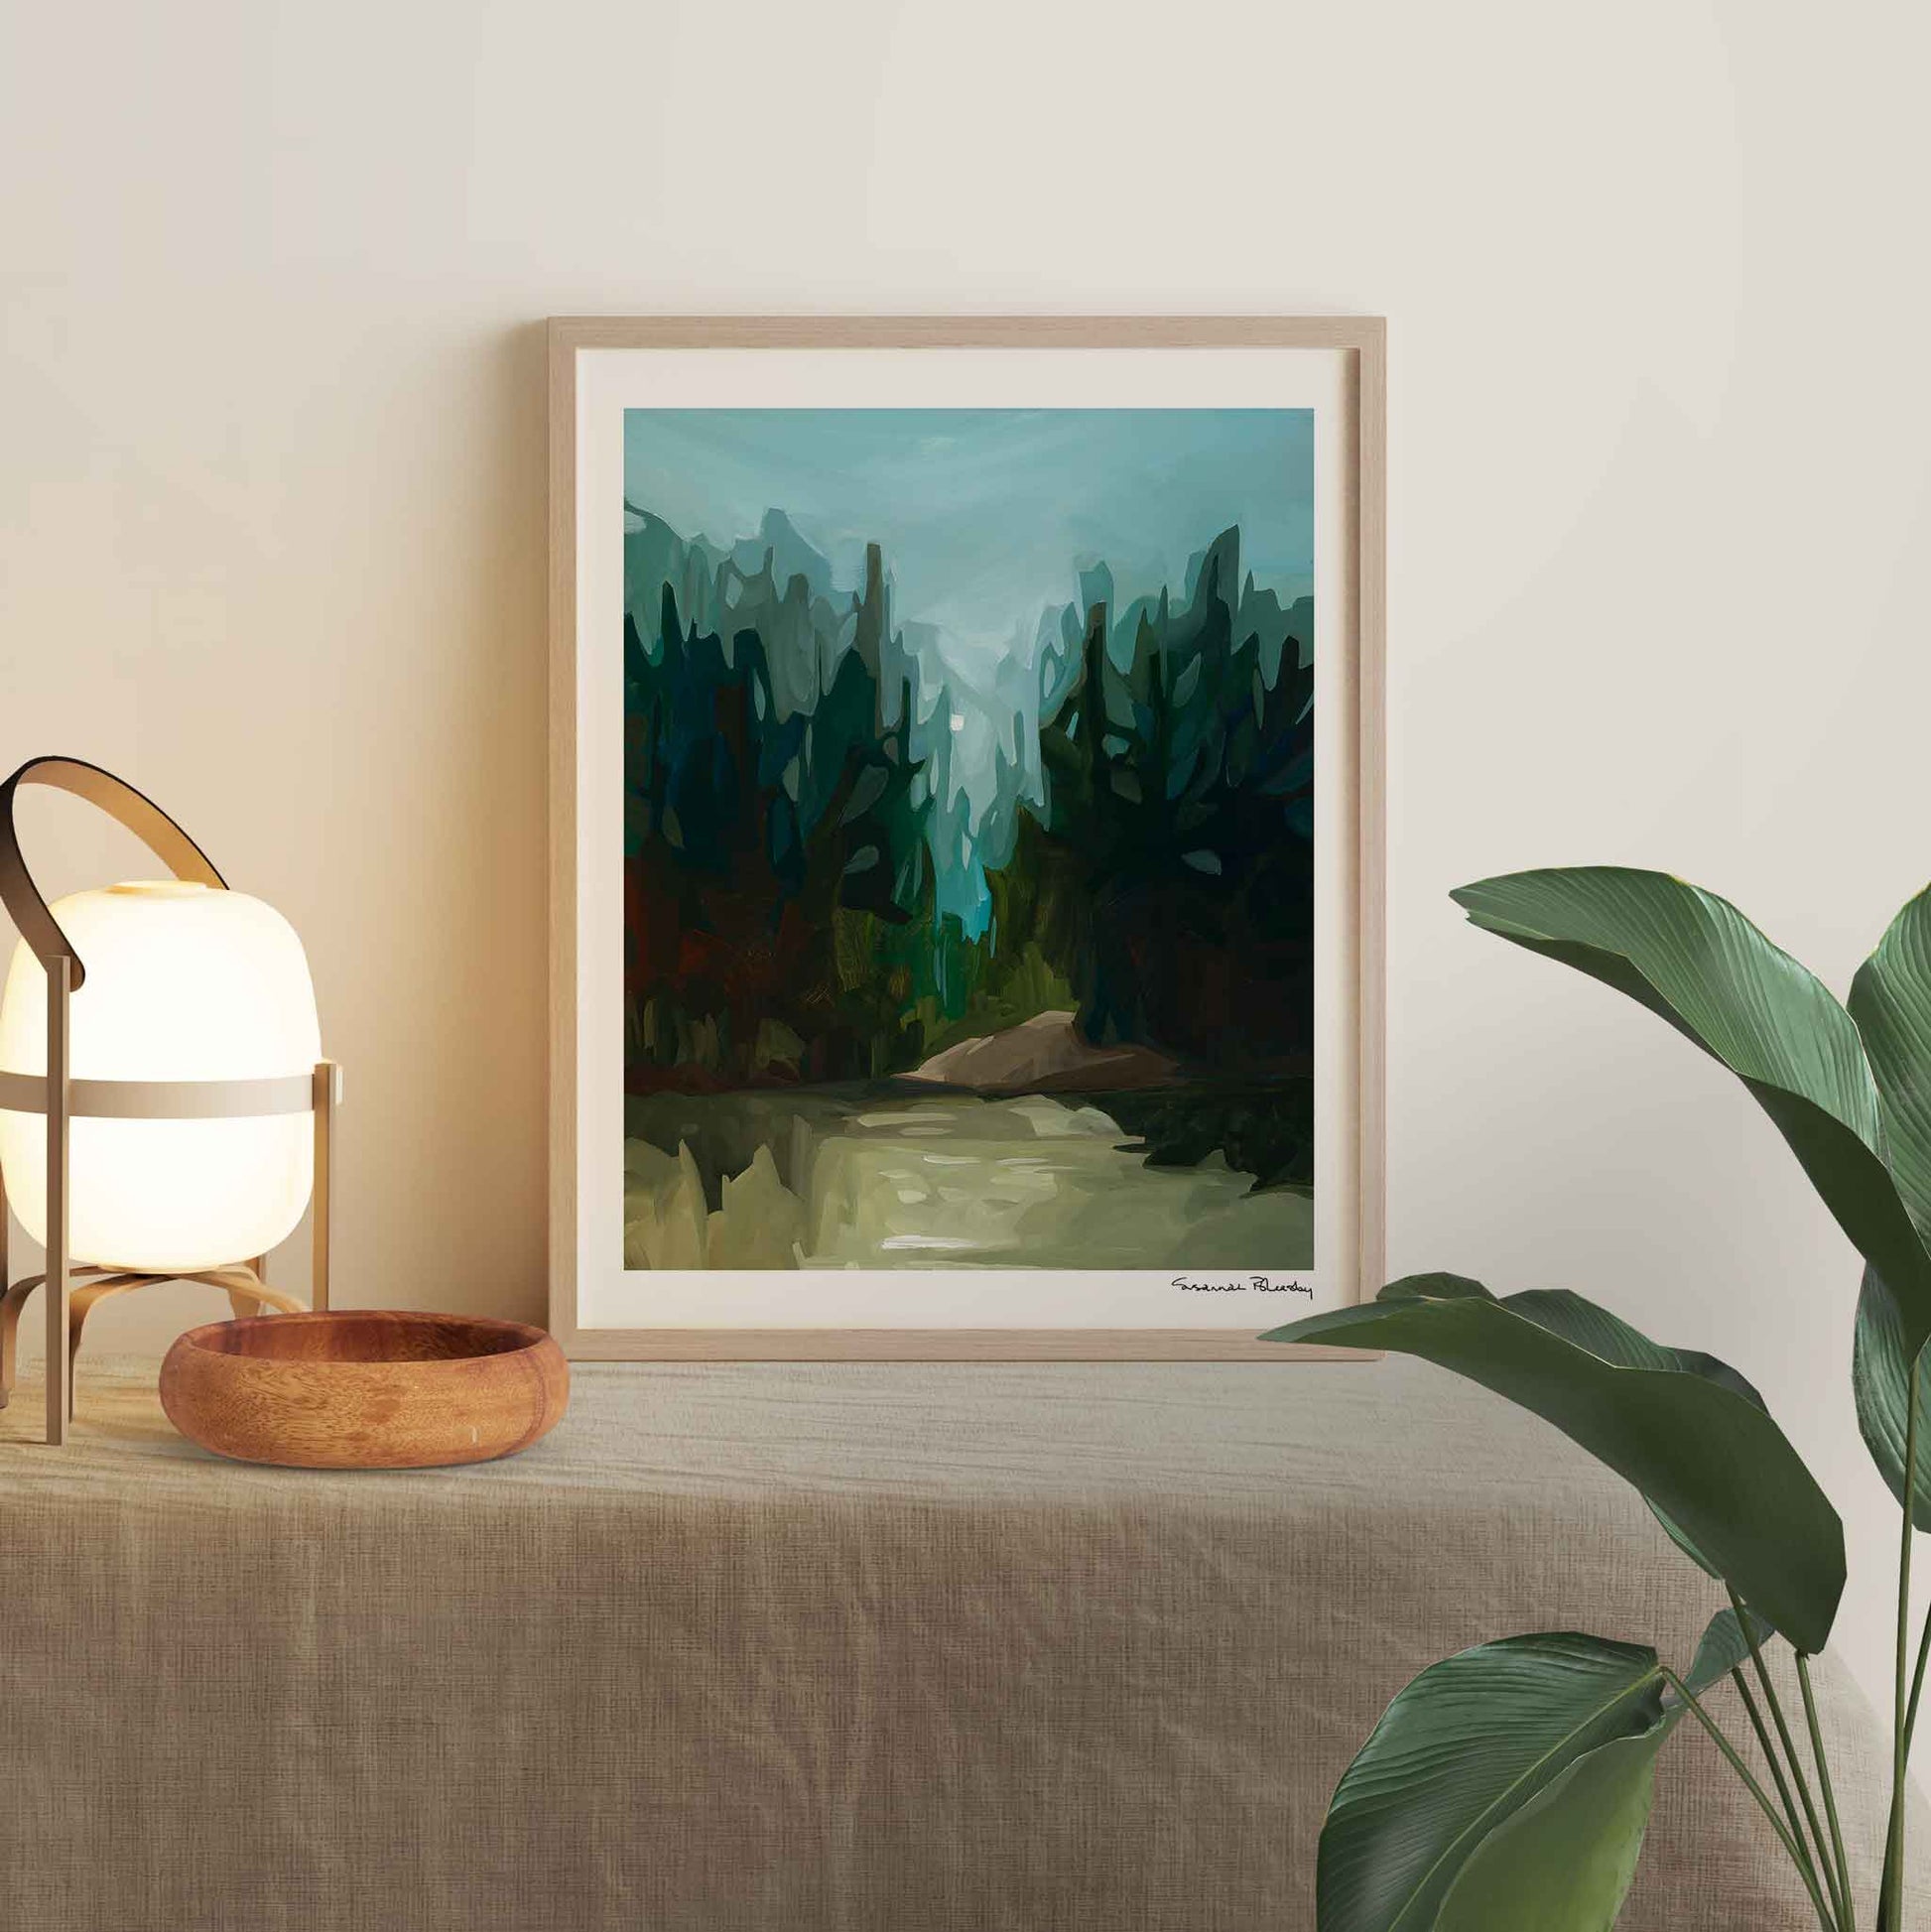 â€˜Pinecrestâ€™ is an abstract landscape art print of a forest painting reflecting the soothing effect of moonlight on dark trees.